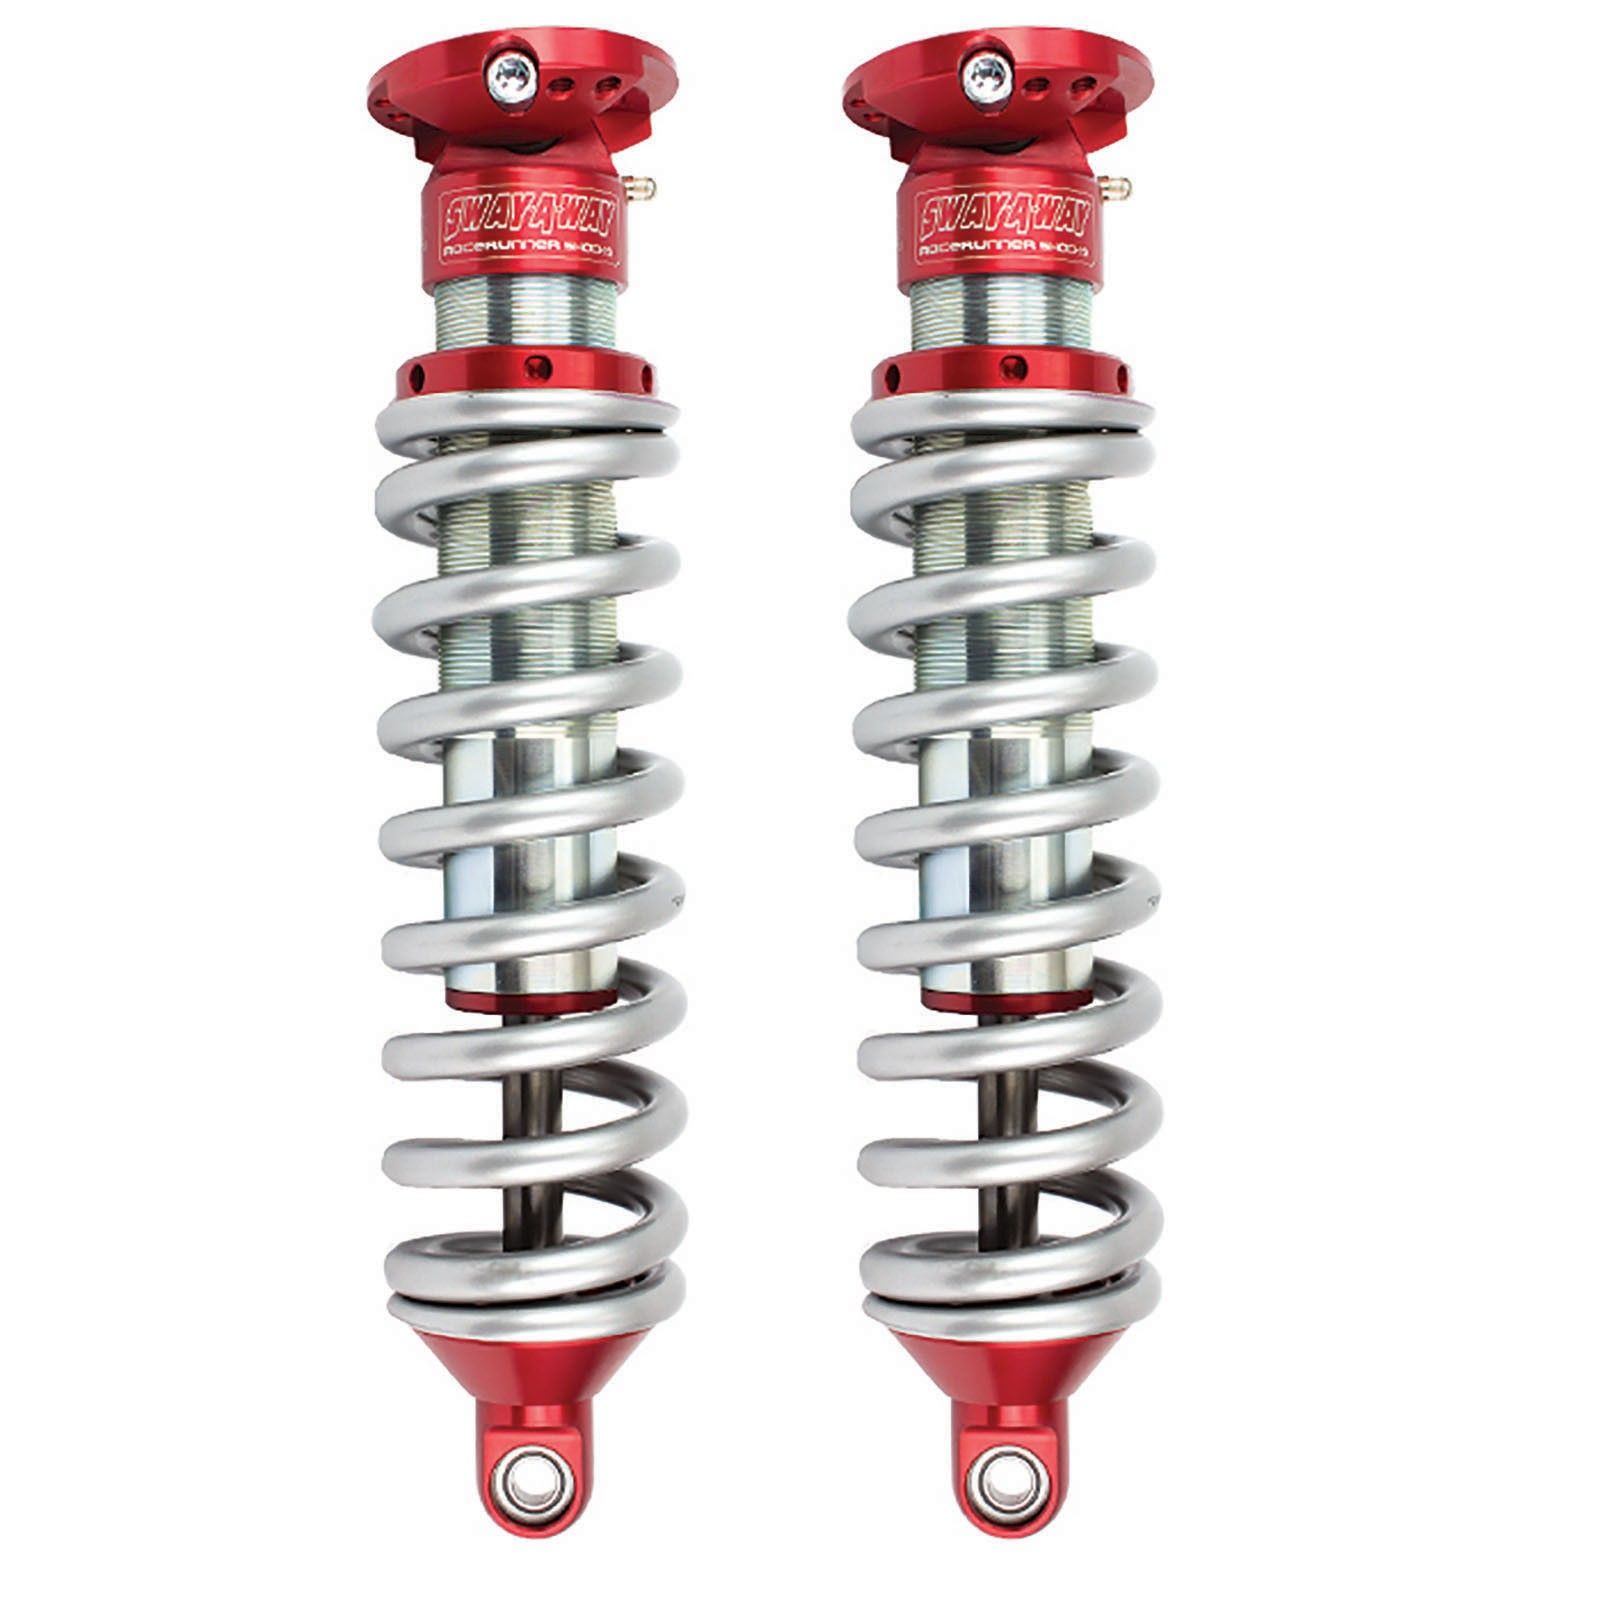 1996-2004 Toyota Tacoma 2.4L/2.7L/V6 3.4L aFe Control Sway-A-Way 2.5" Front Coilover Kit - 101-5600-01